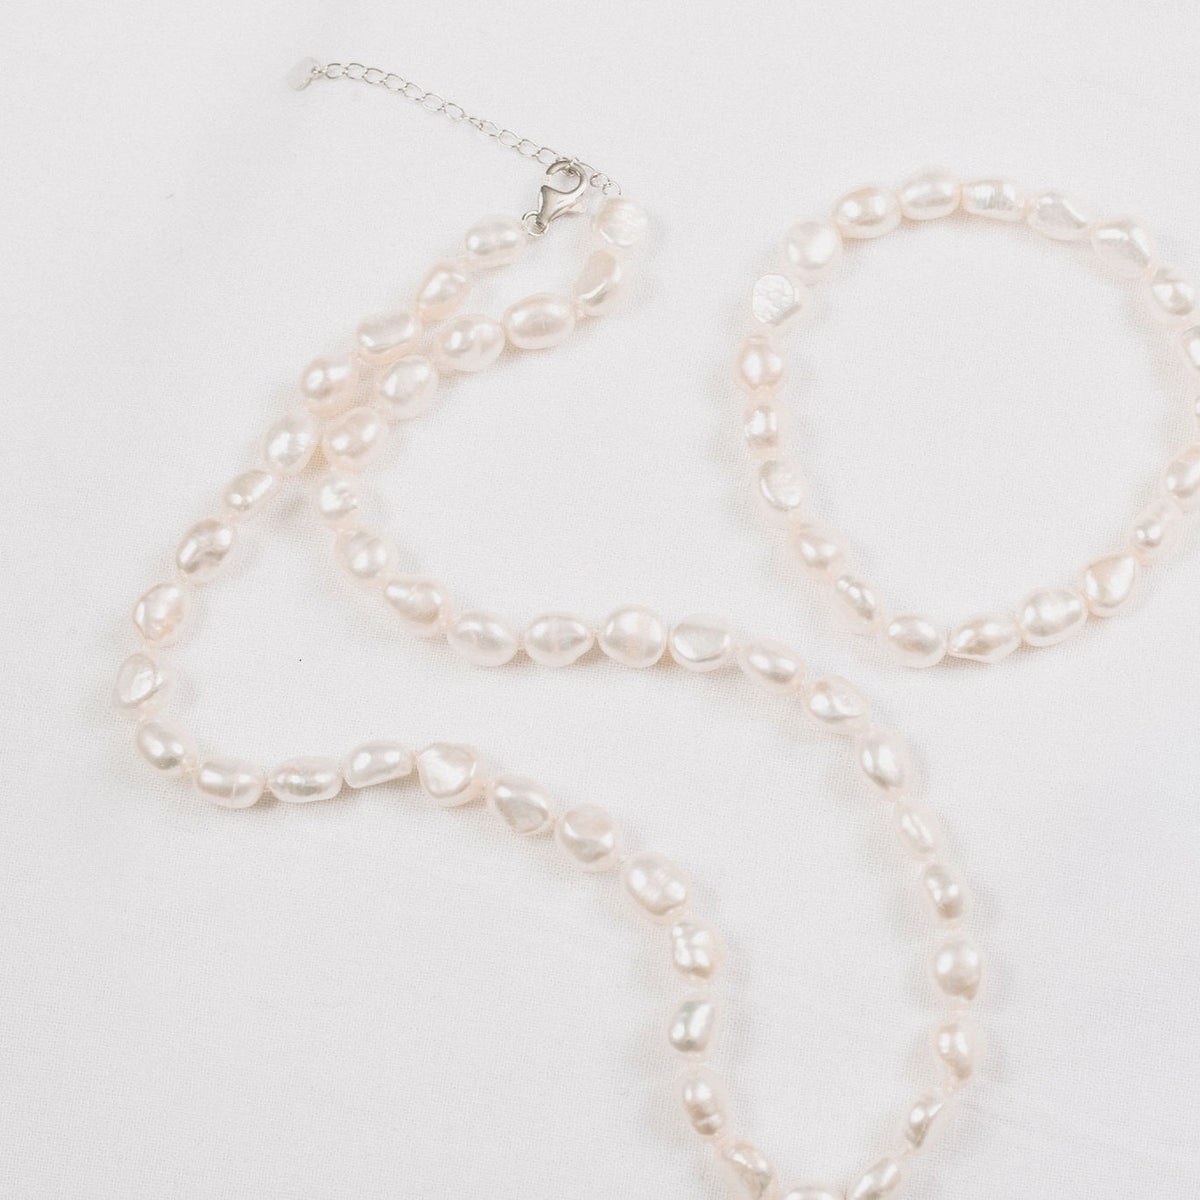 Freshwater Pearl Necklace and Bracelet